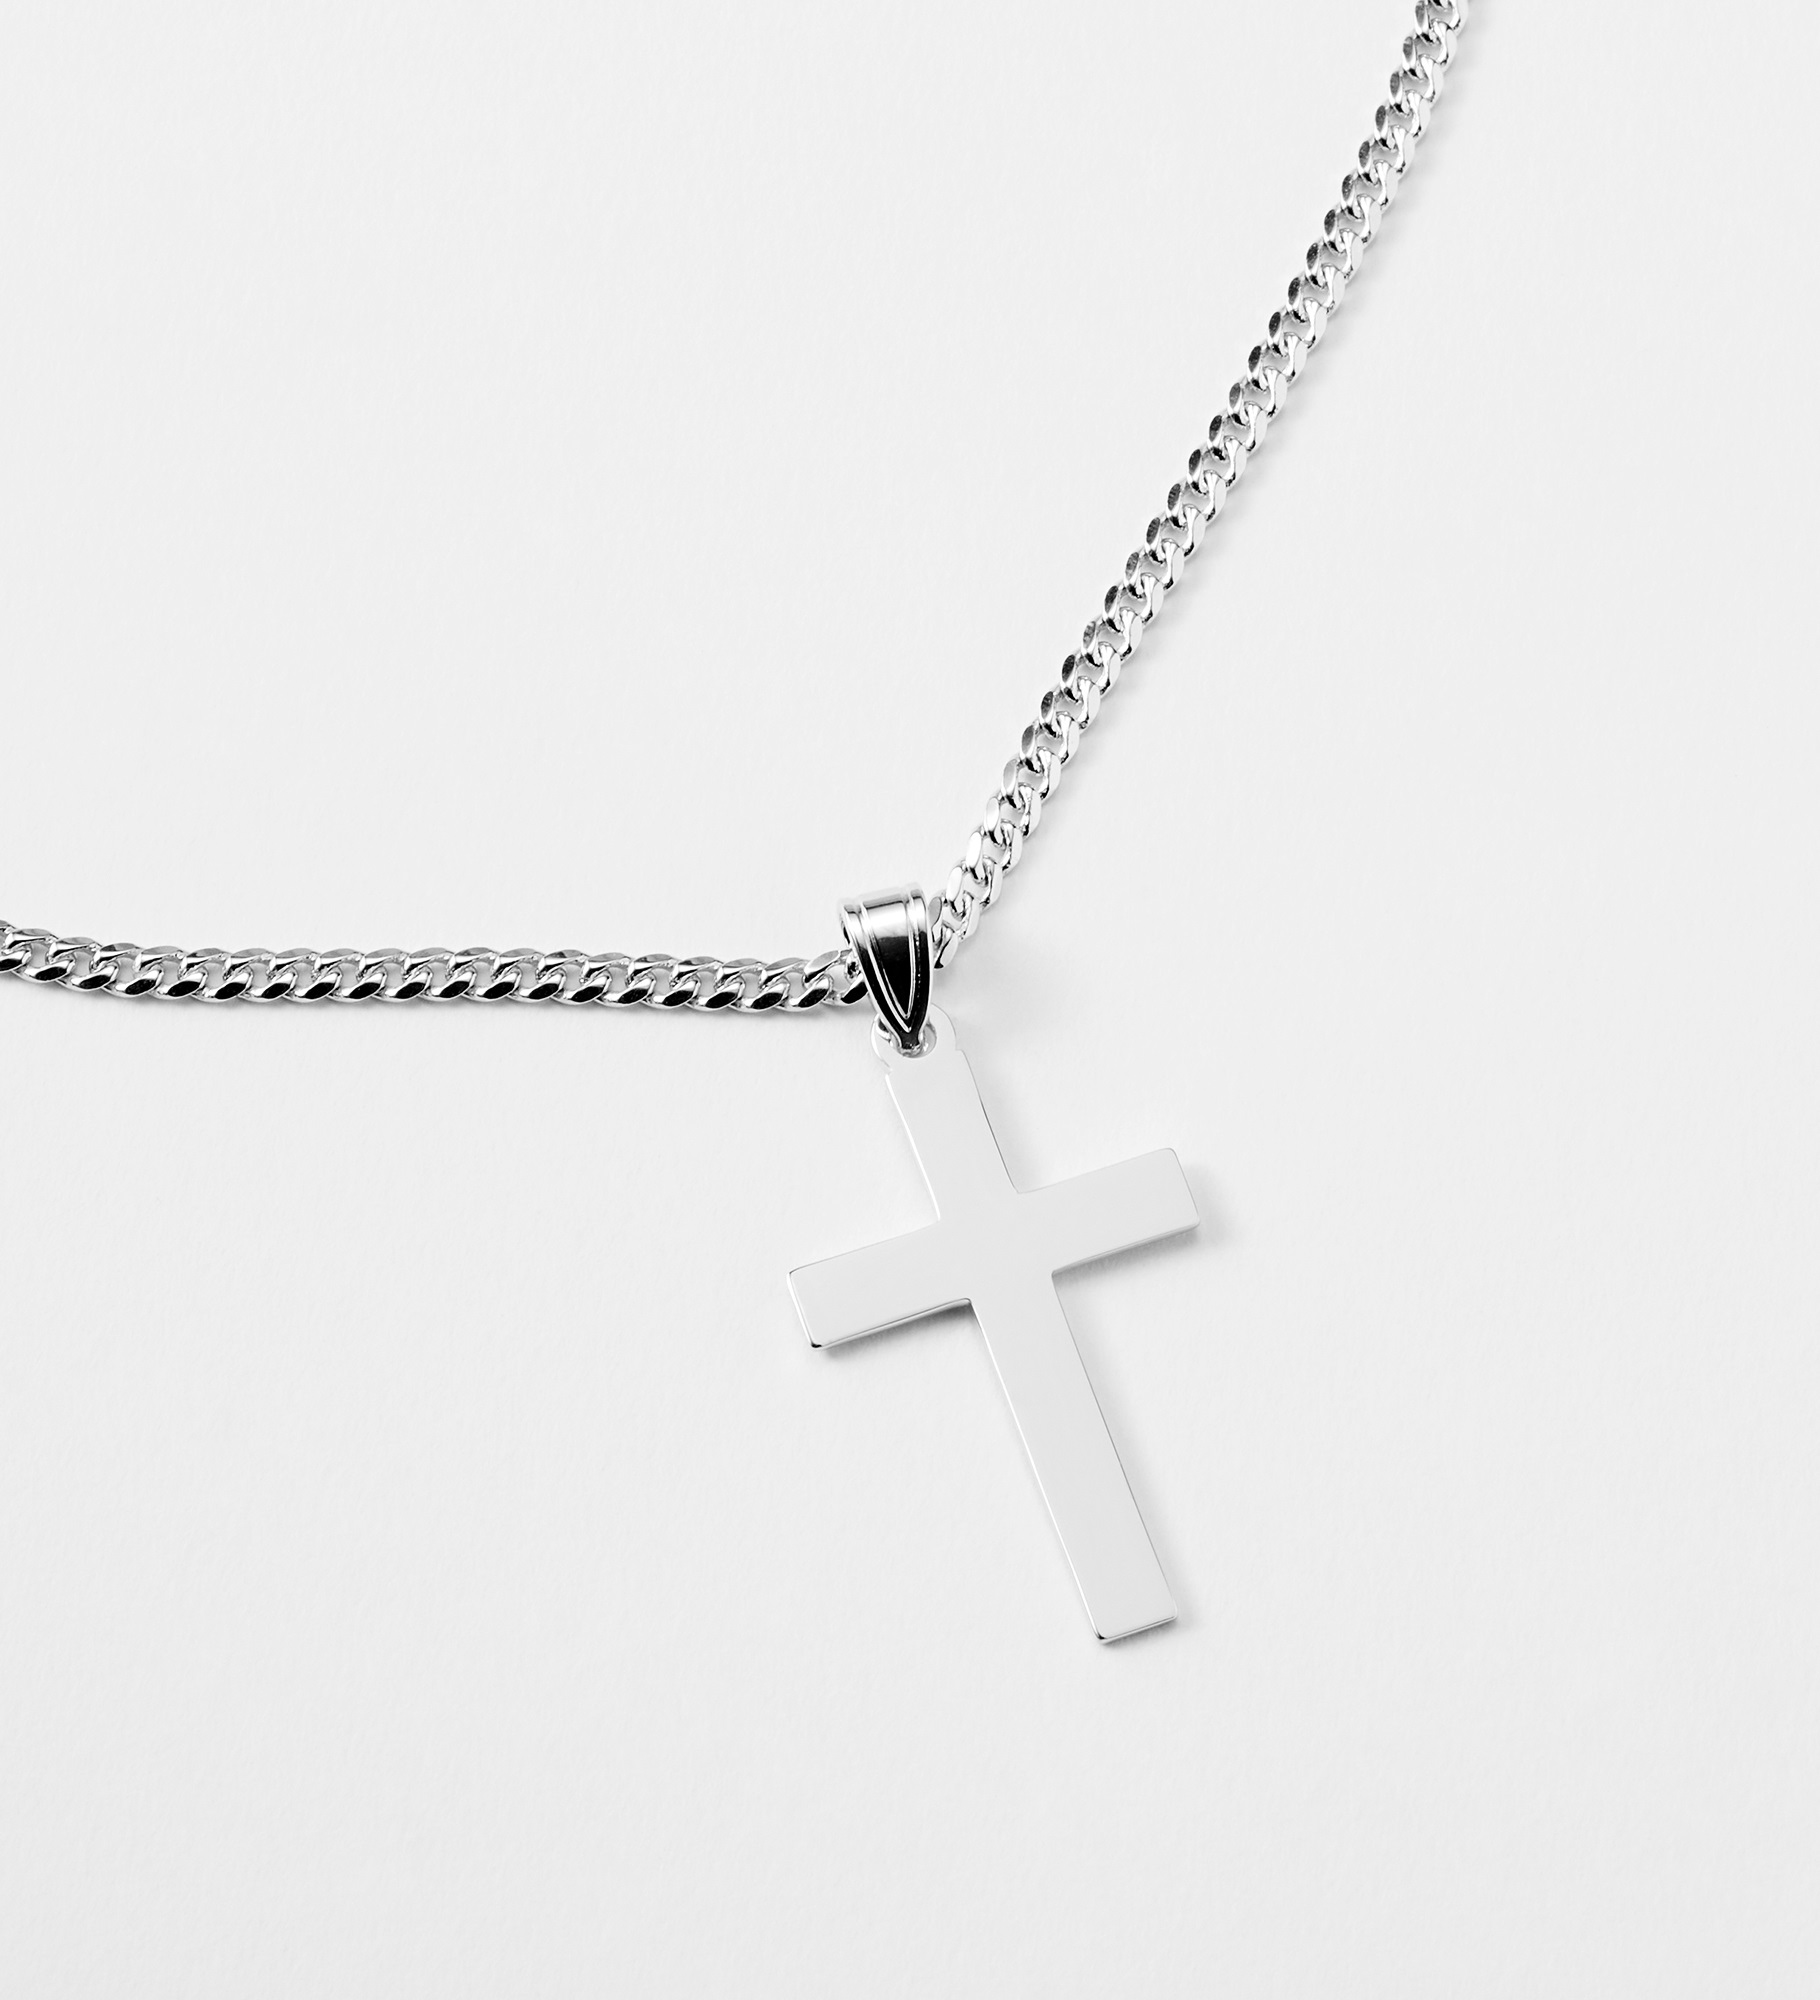  Engraved Sterling Silver Cross Necklace